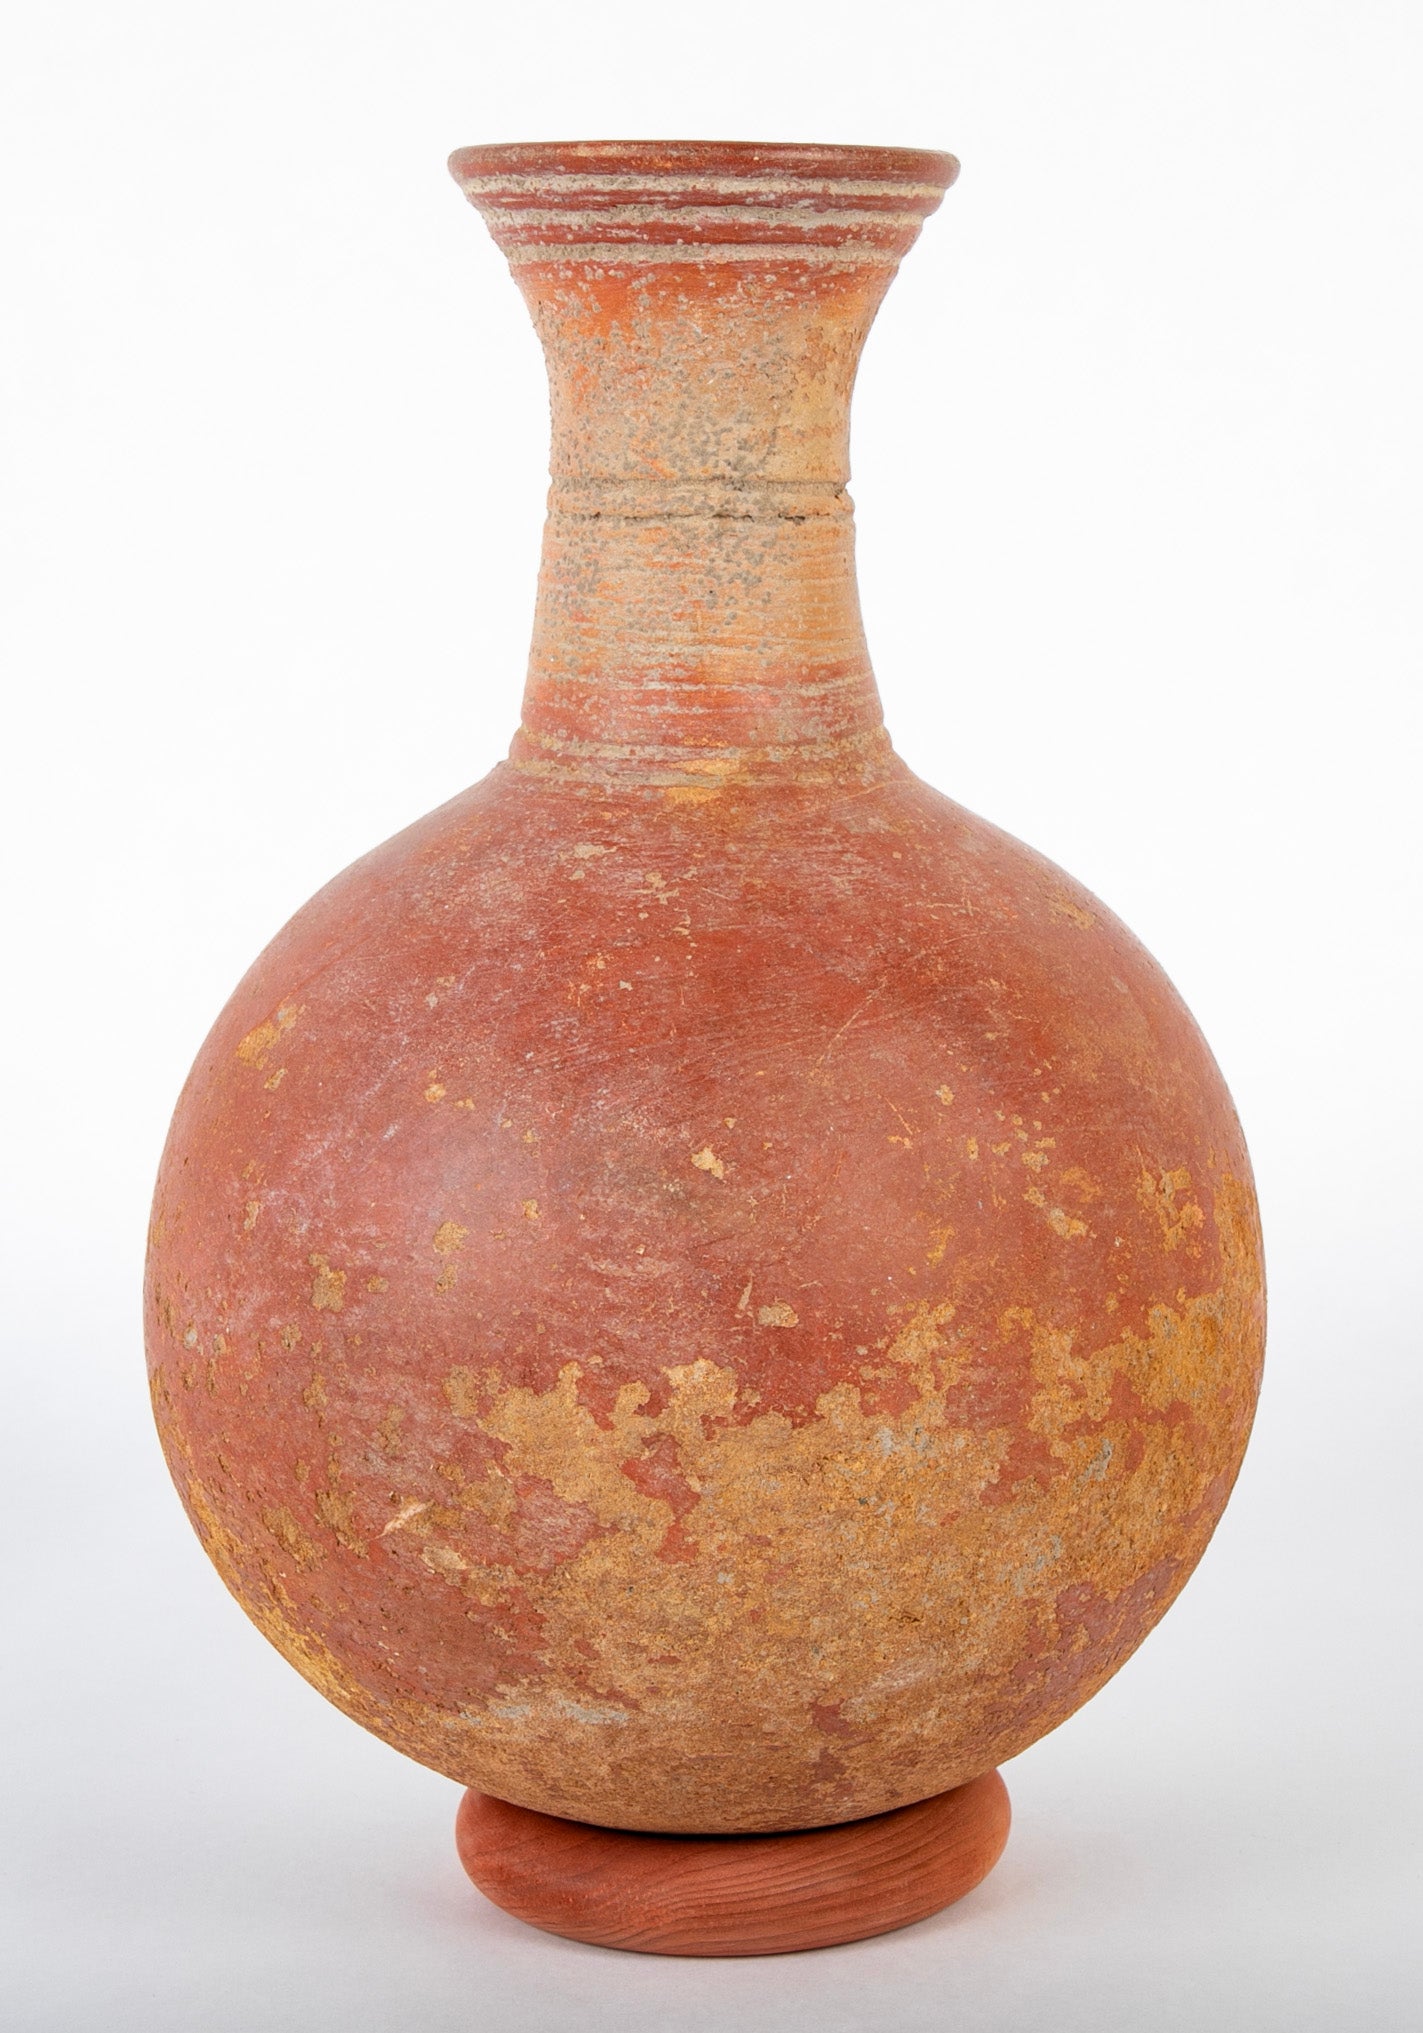 Dejenne, Mali Tear Drop Form Red Clay Vessel with Incised Neck